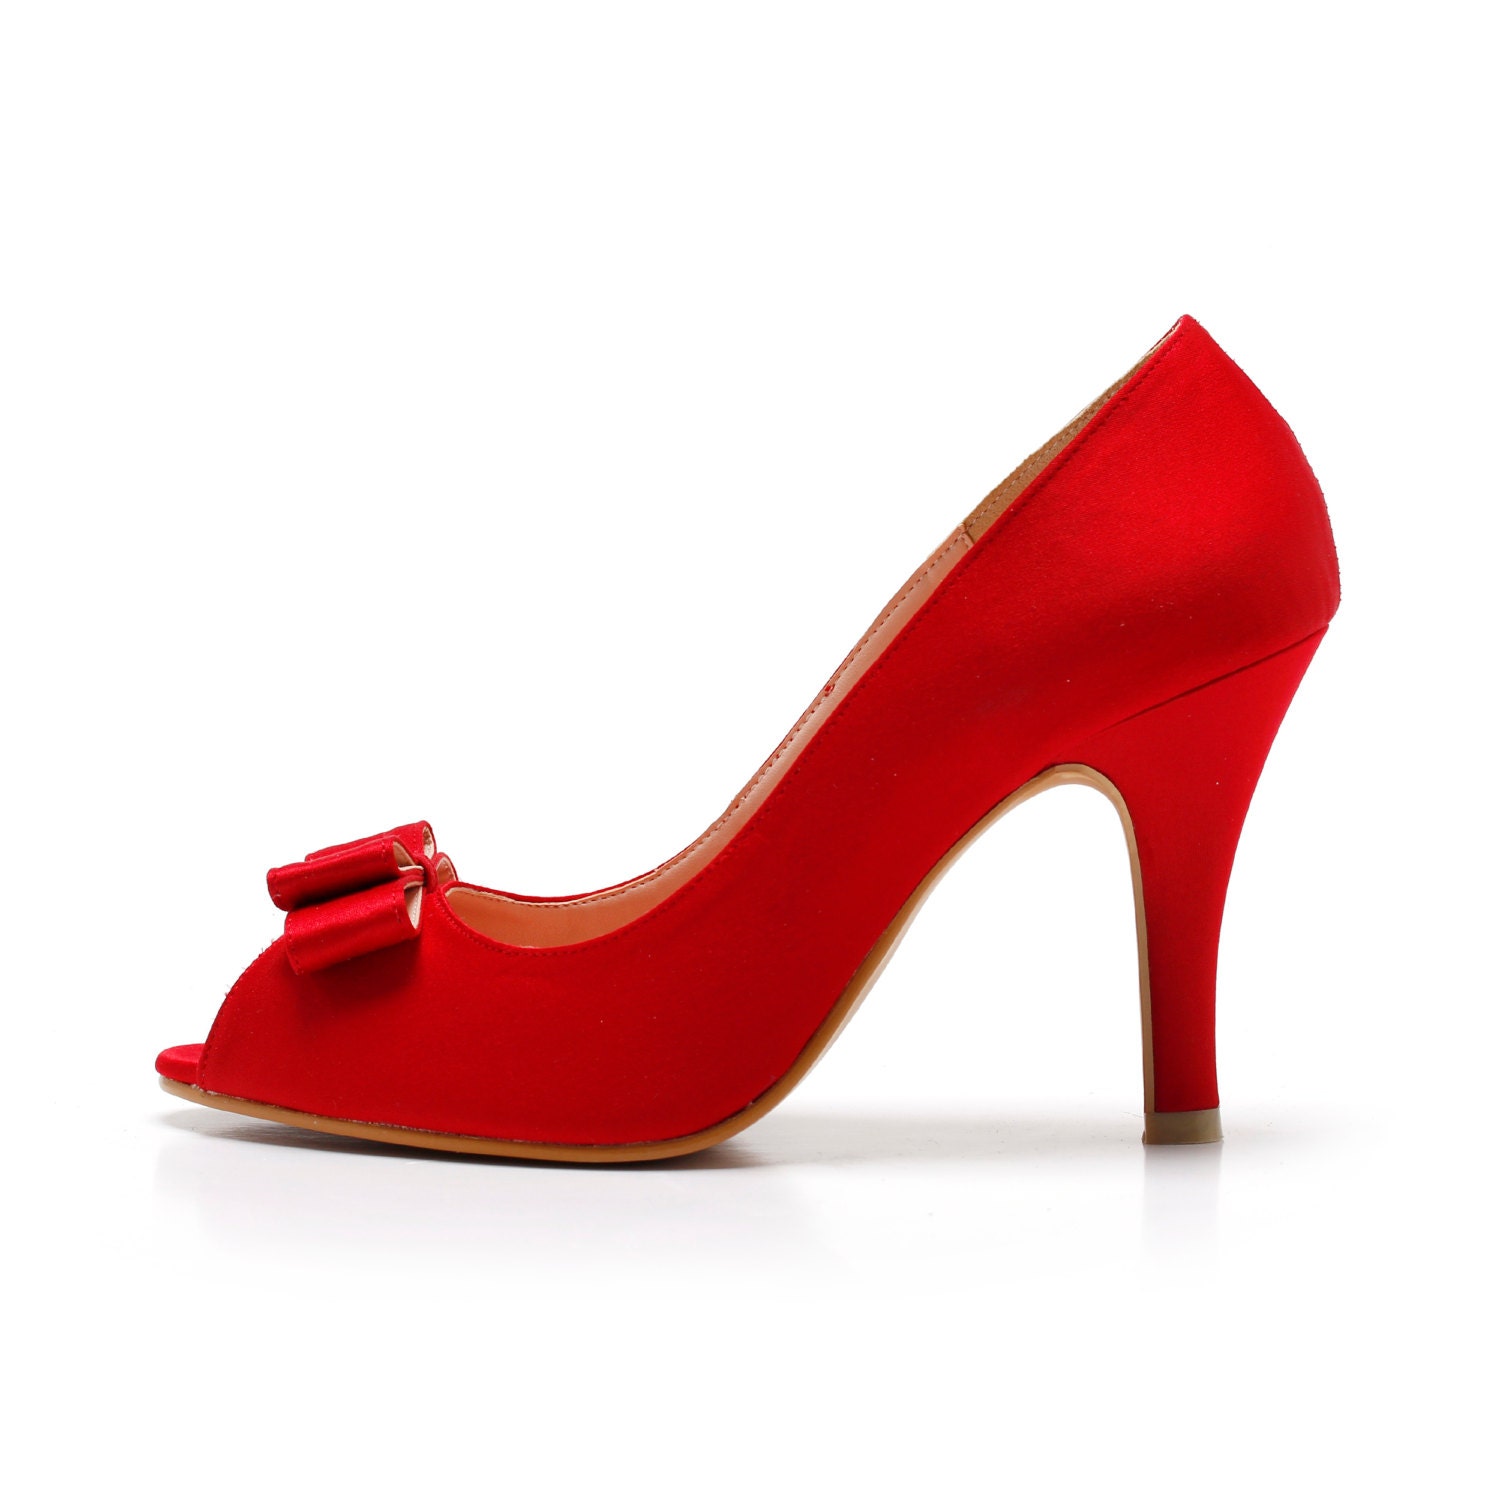 Princess Layla Red Red Peep Toe Court ShoesRed by ChristyNgShoes